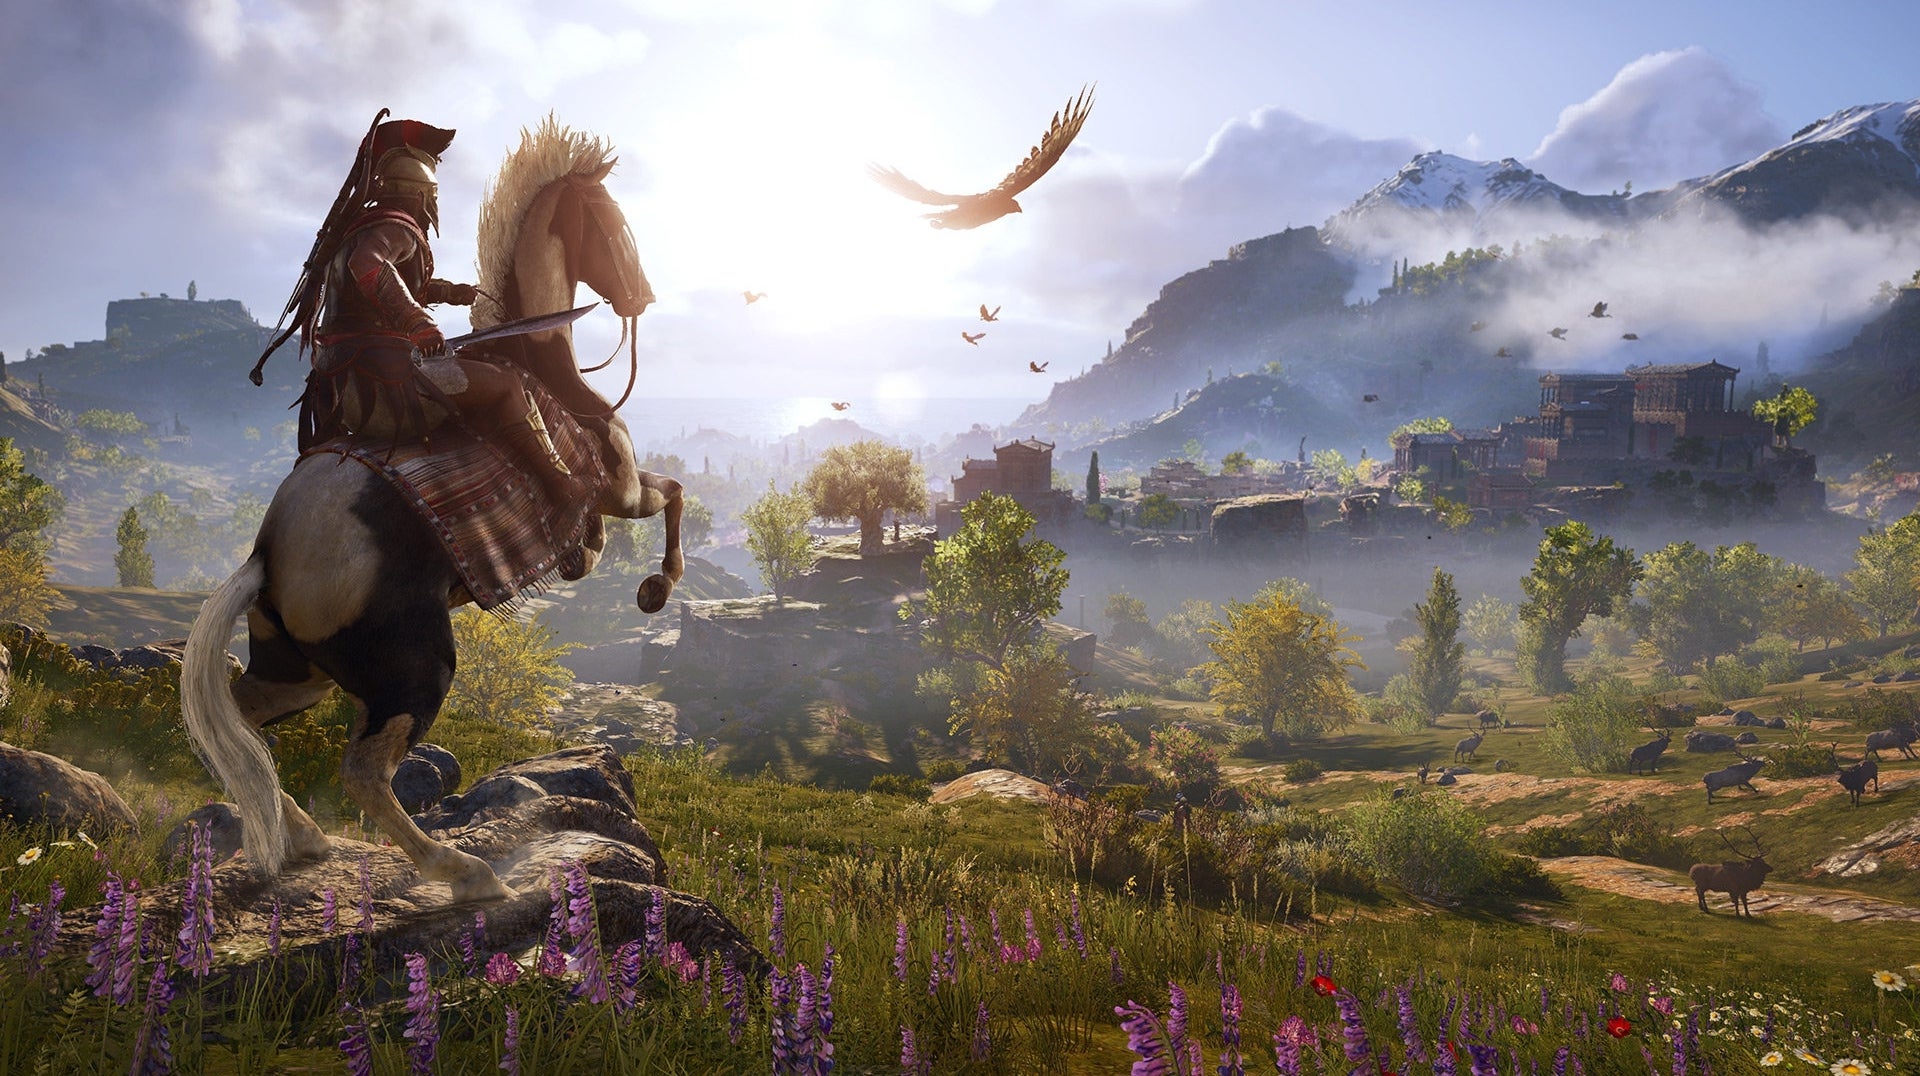 Image for Assassin's Creed Odyssey guide - tips and tricks for adventuring in ancient Greece